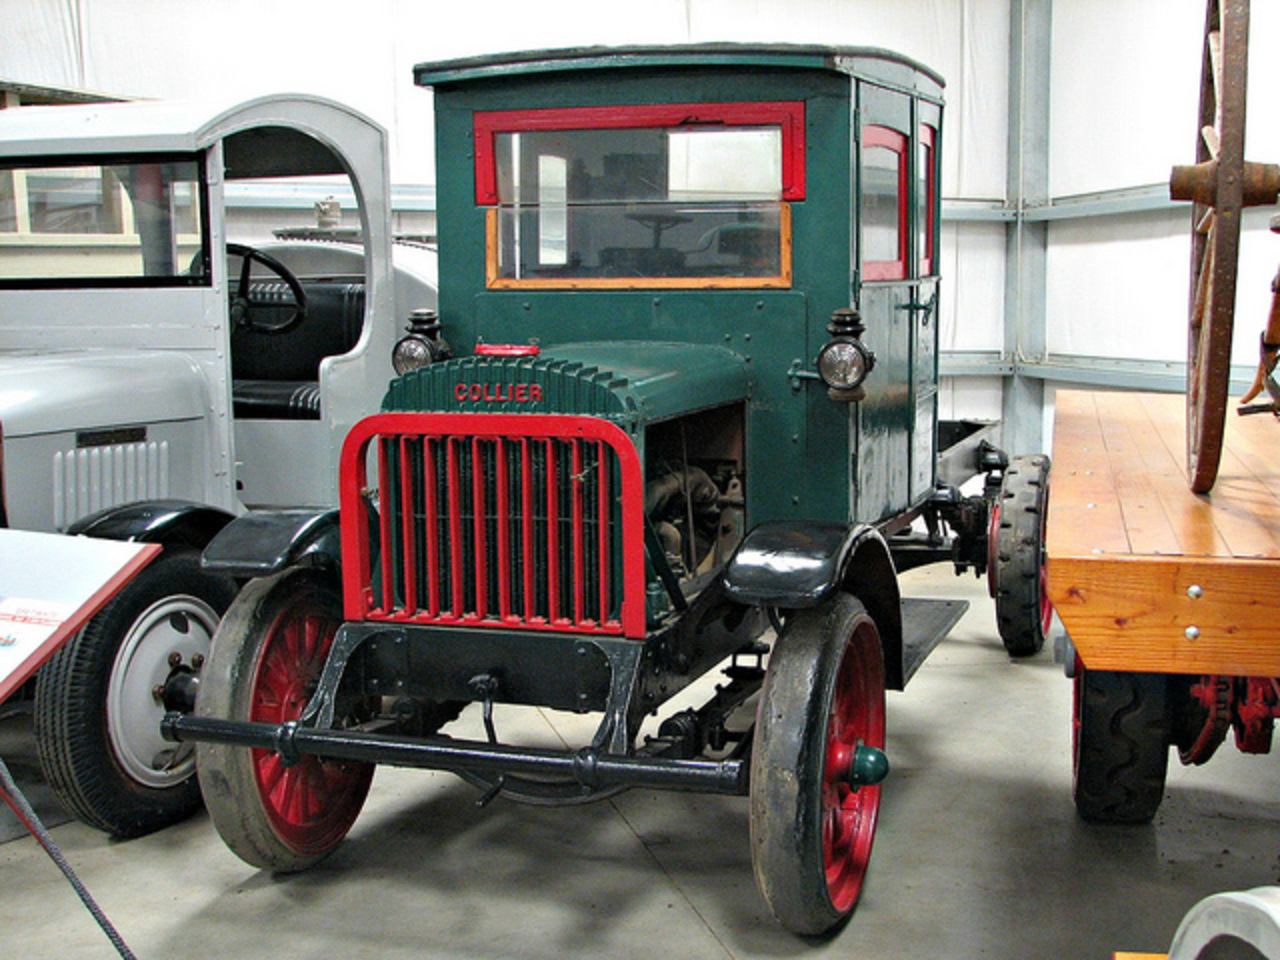 1920 Collier 2 ton Cab & Chassis 1 | Flickr - Photo Sharing!